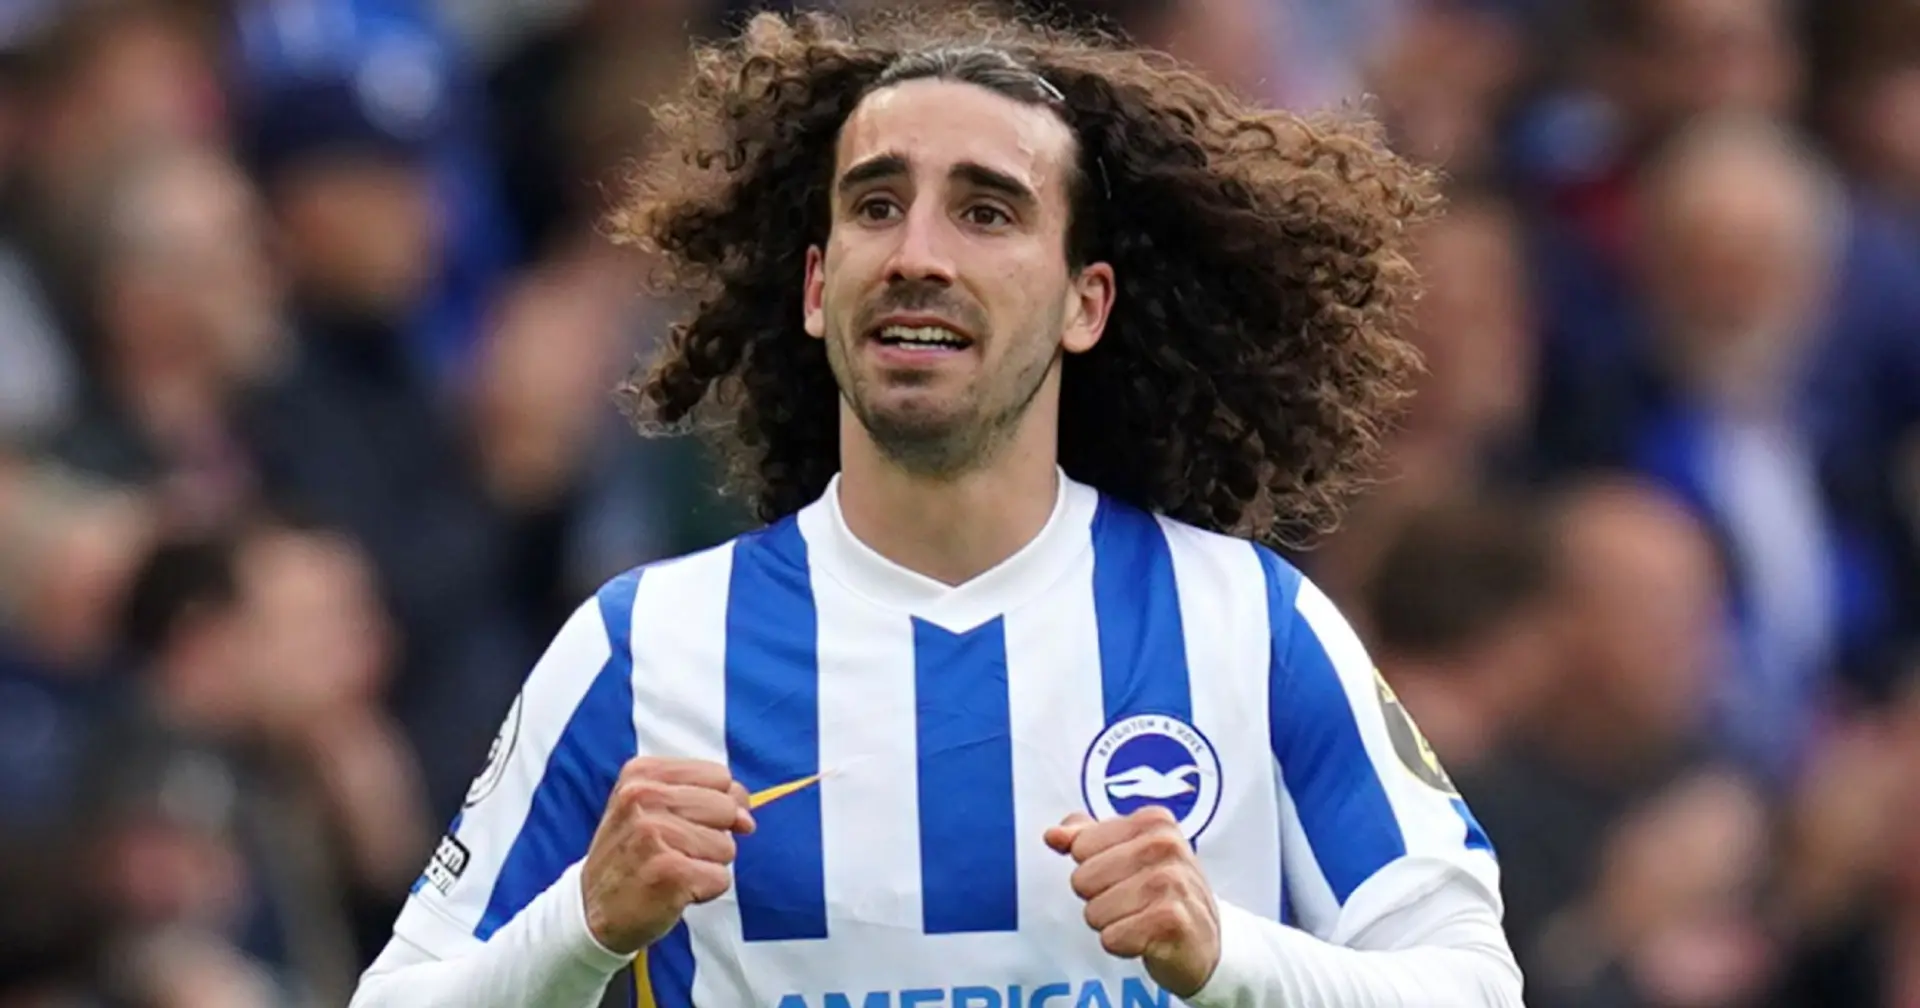 Brighton deny agreement with Chelsea over Cucurella